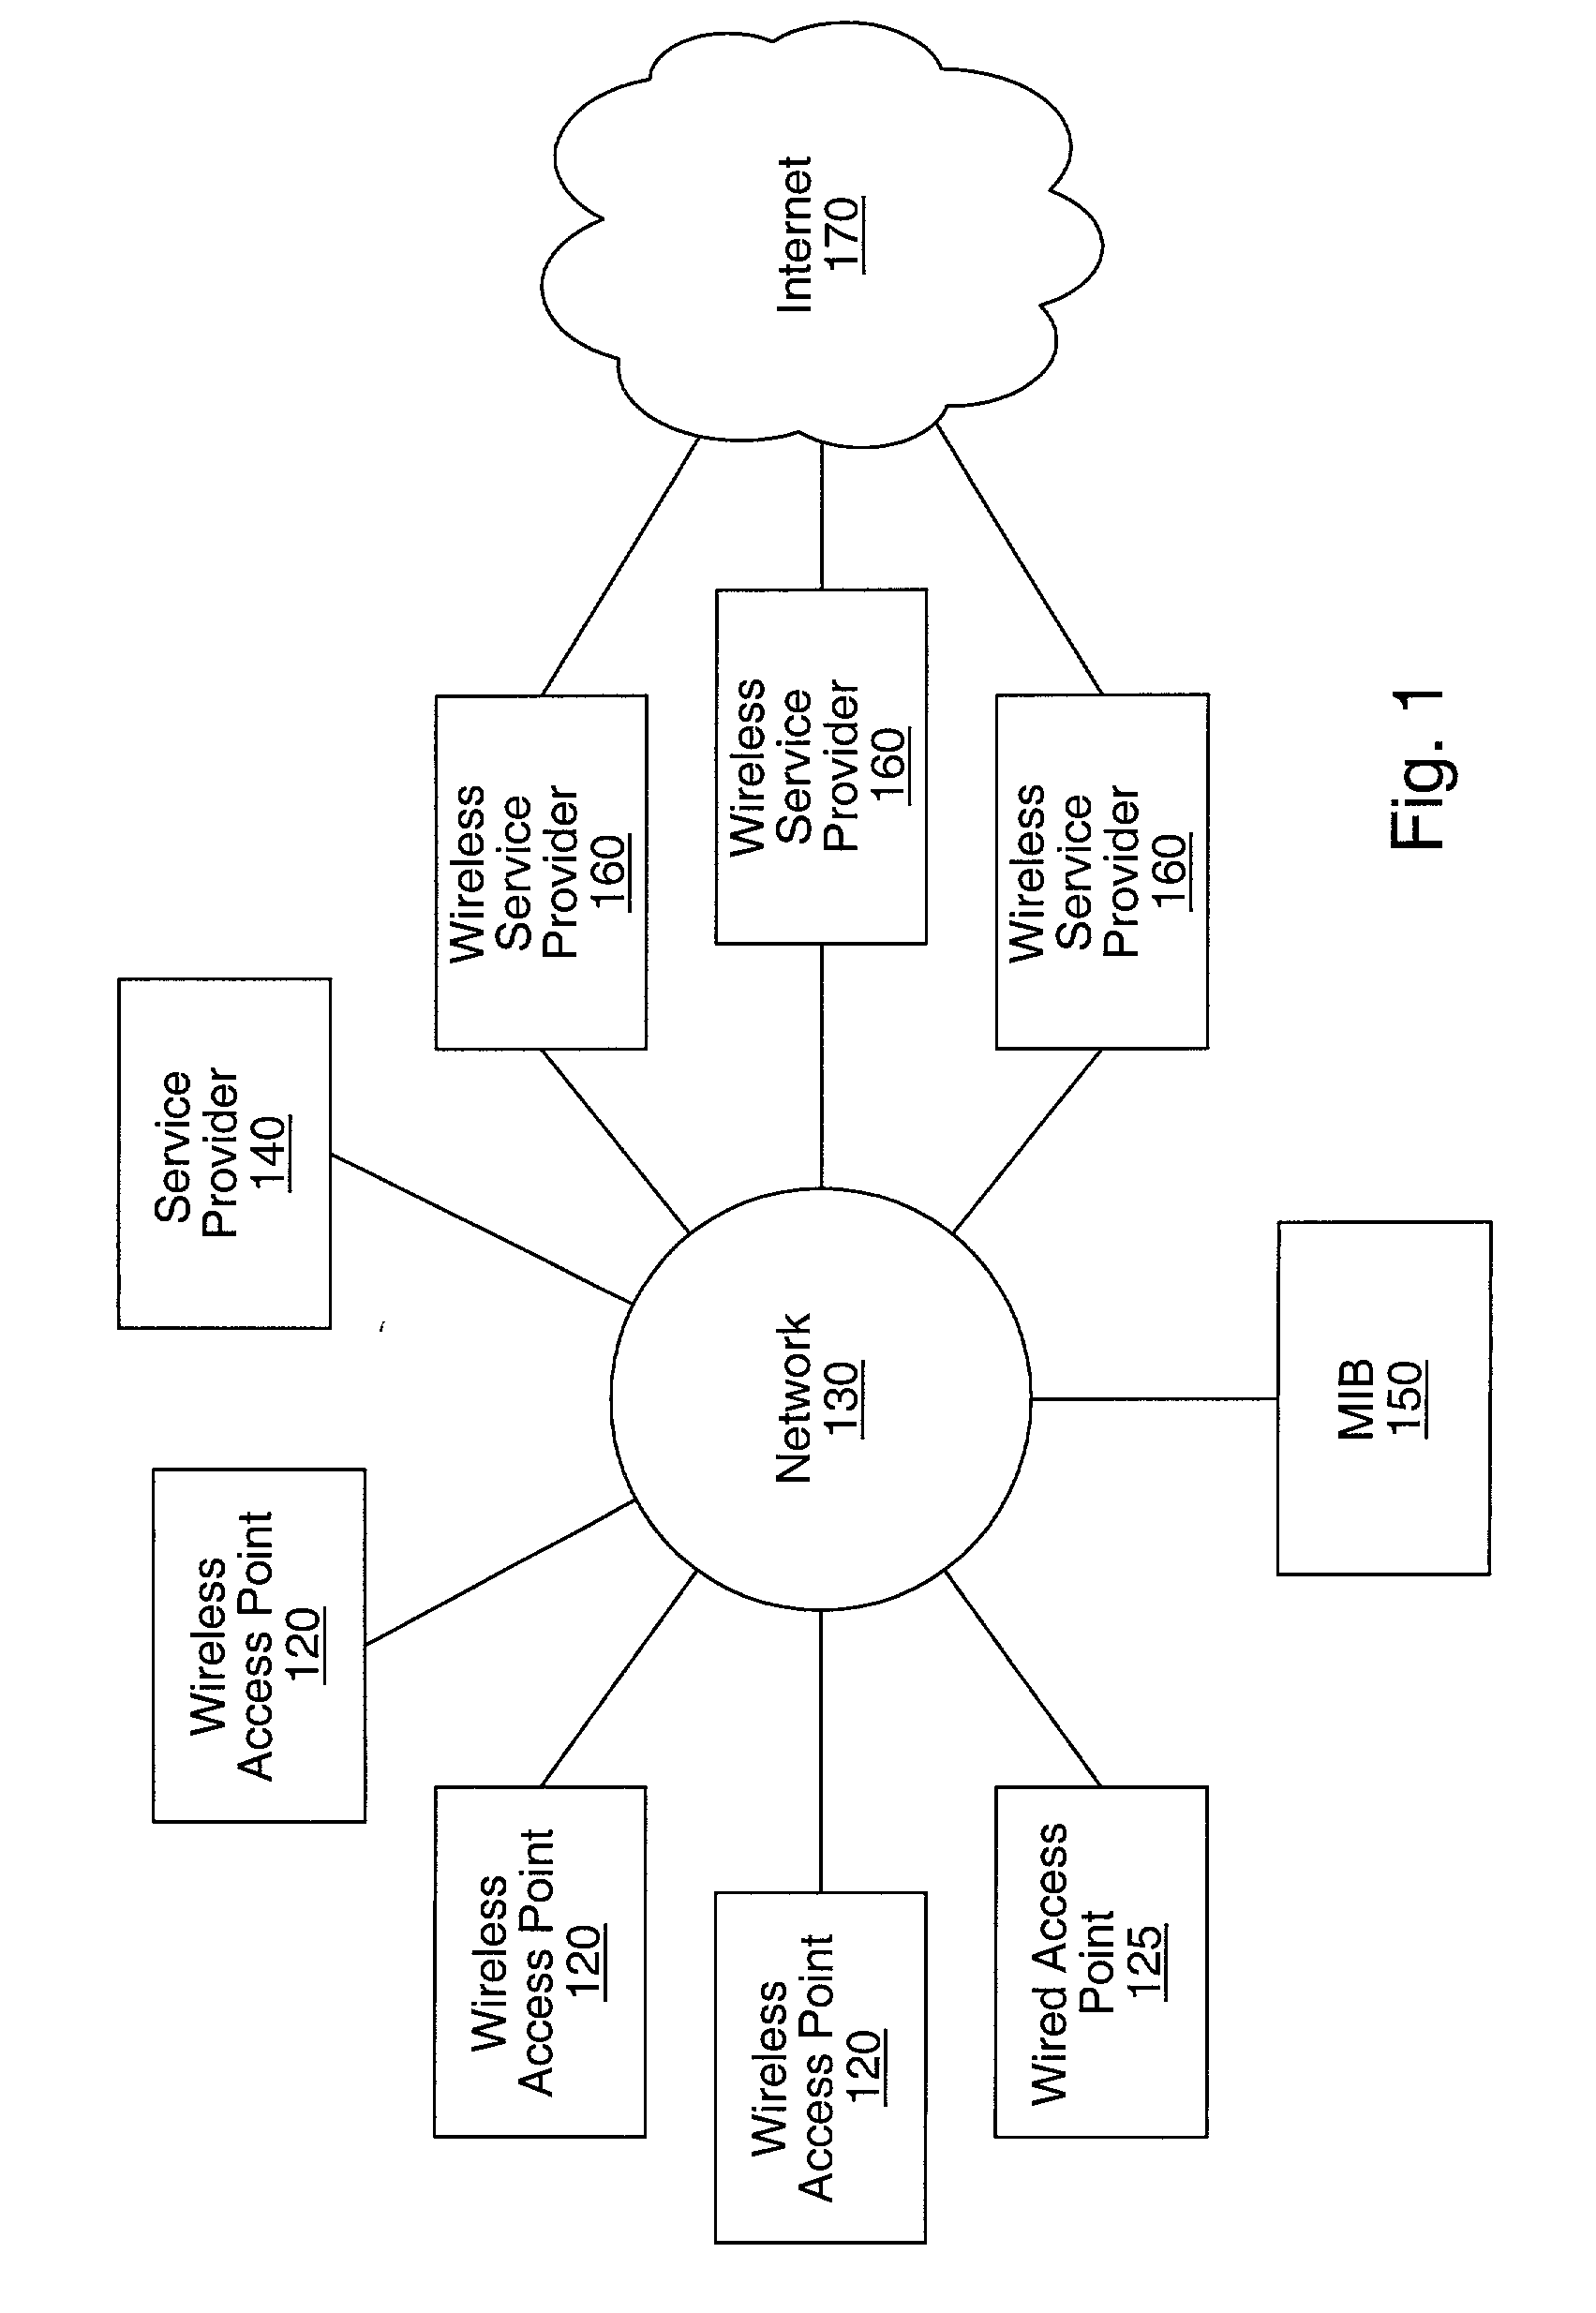 Distributed network communication system which allows multiple wireless service providers to share a common network infrastructure